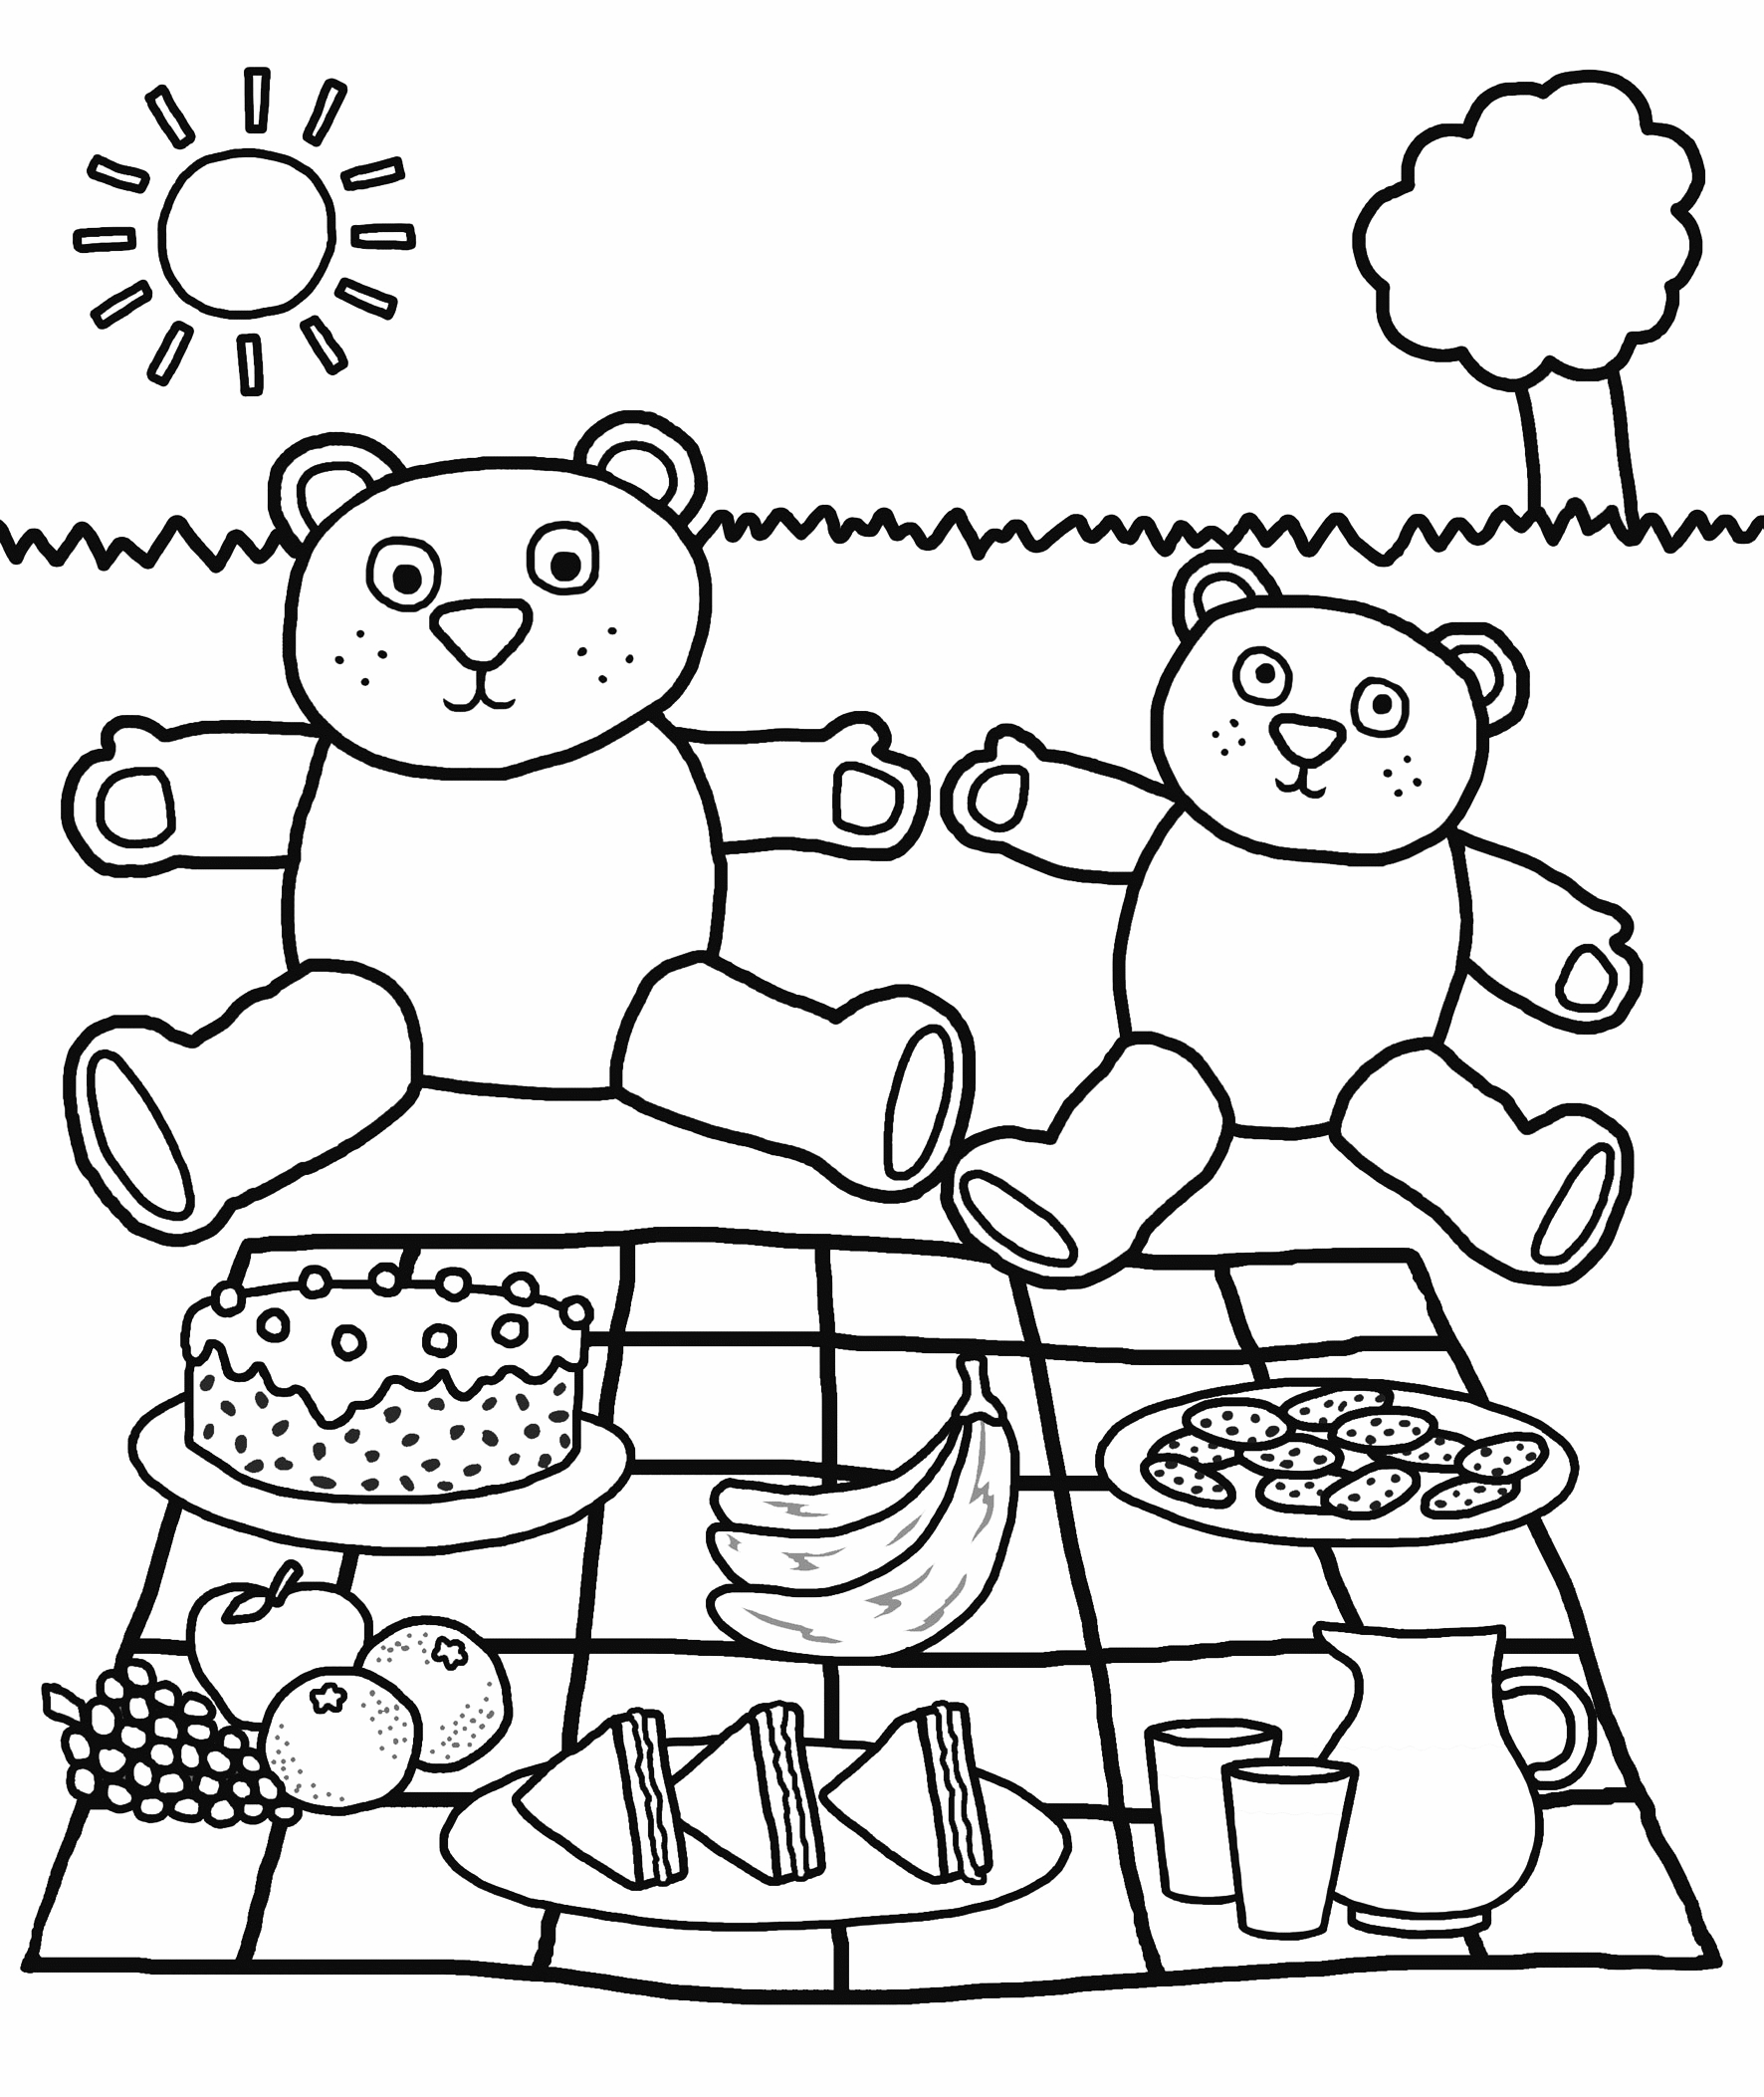 Picnic Coloring Pages - Best Coloring Pages For Kids